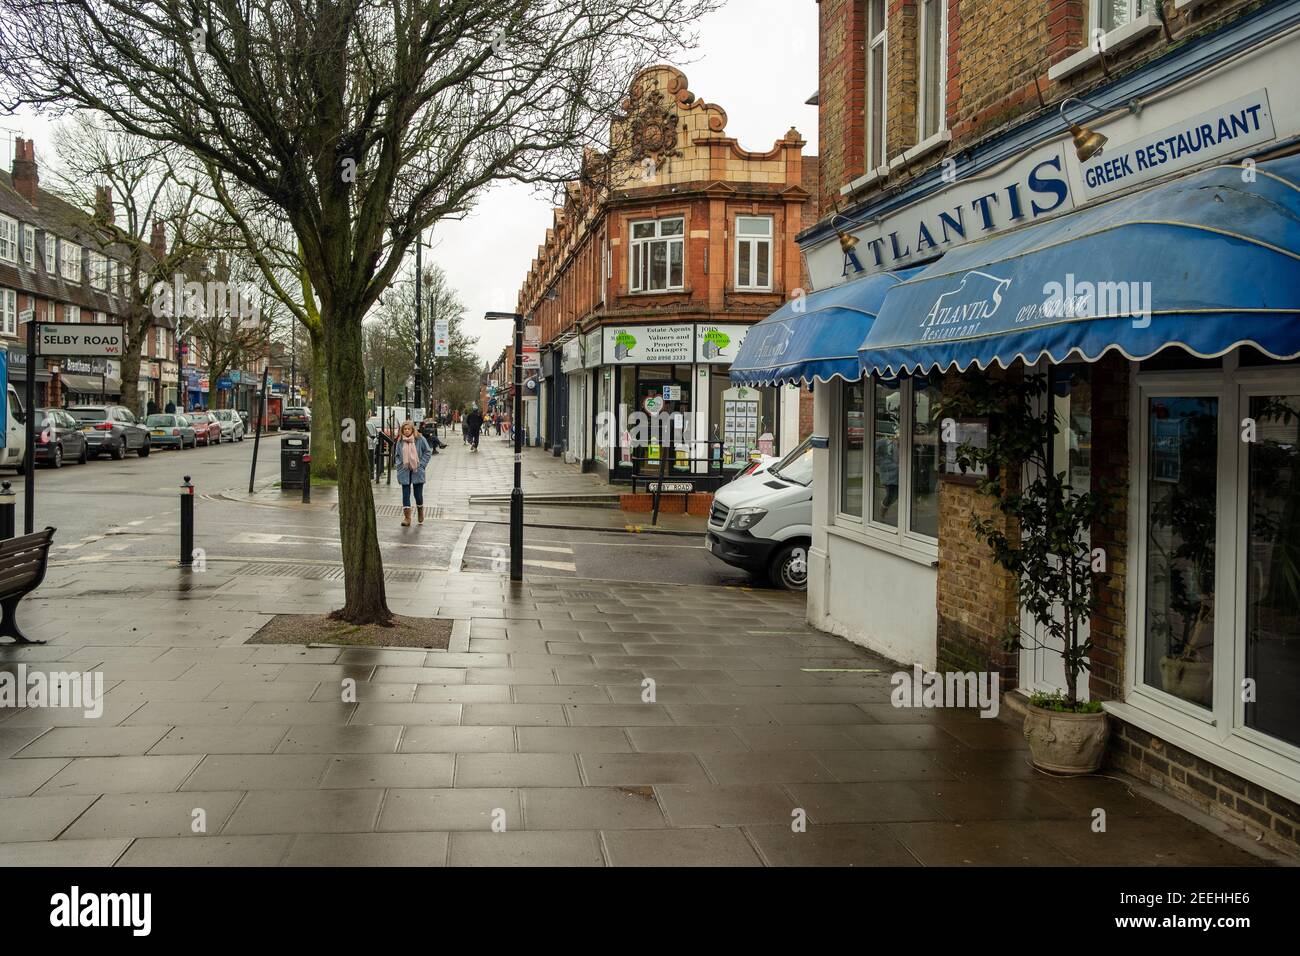 London- February, 2021: Pitshanger Lane, a suburban street of shops and houses in Ealing, west London Stock Photo